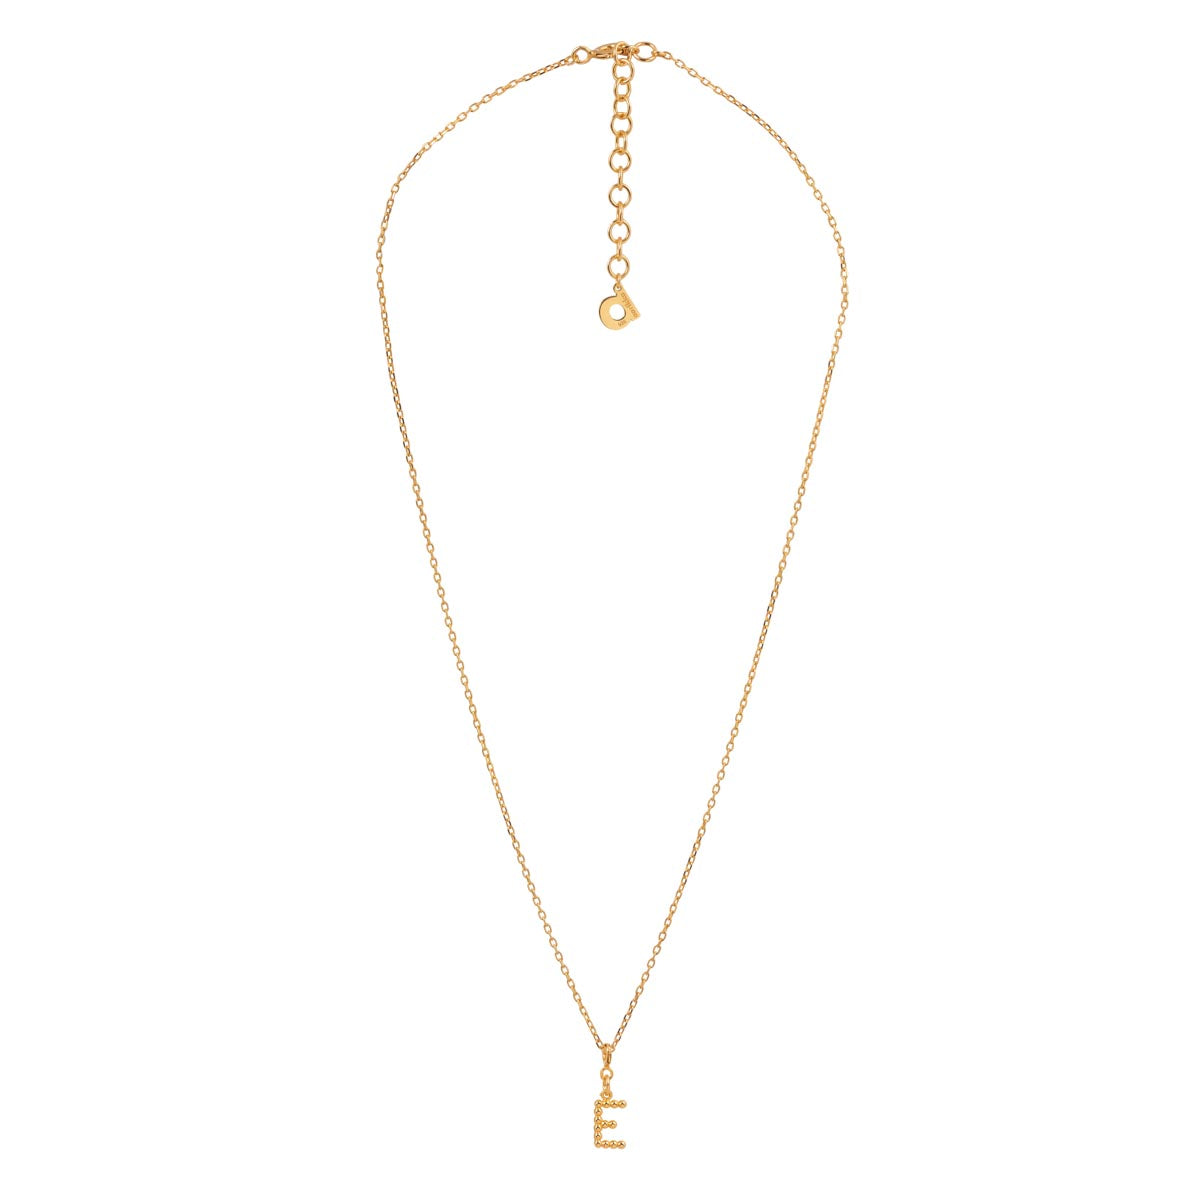 Yllätys Monogram Necklace E, gold-plated silver